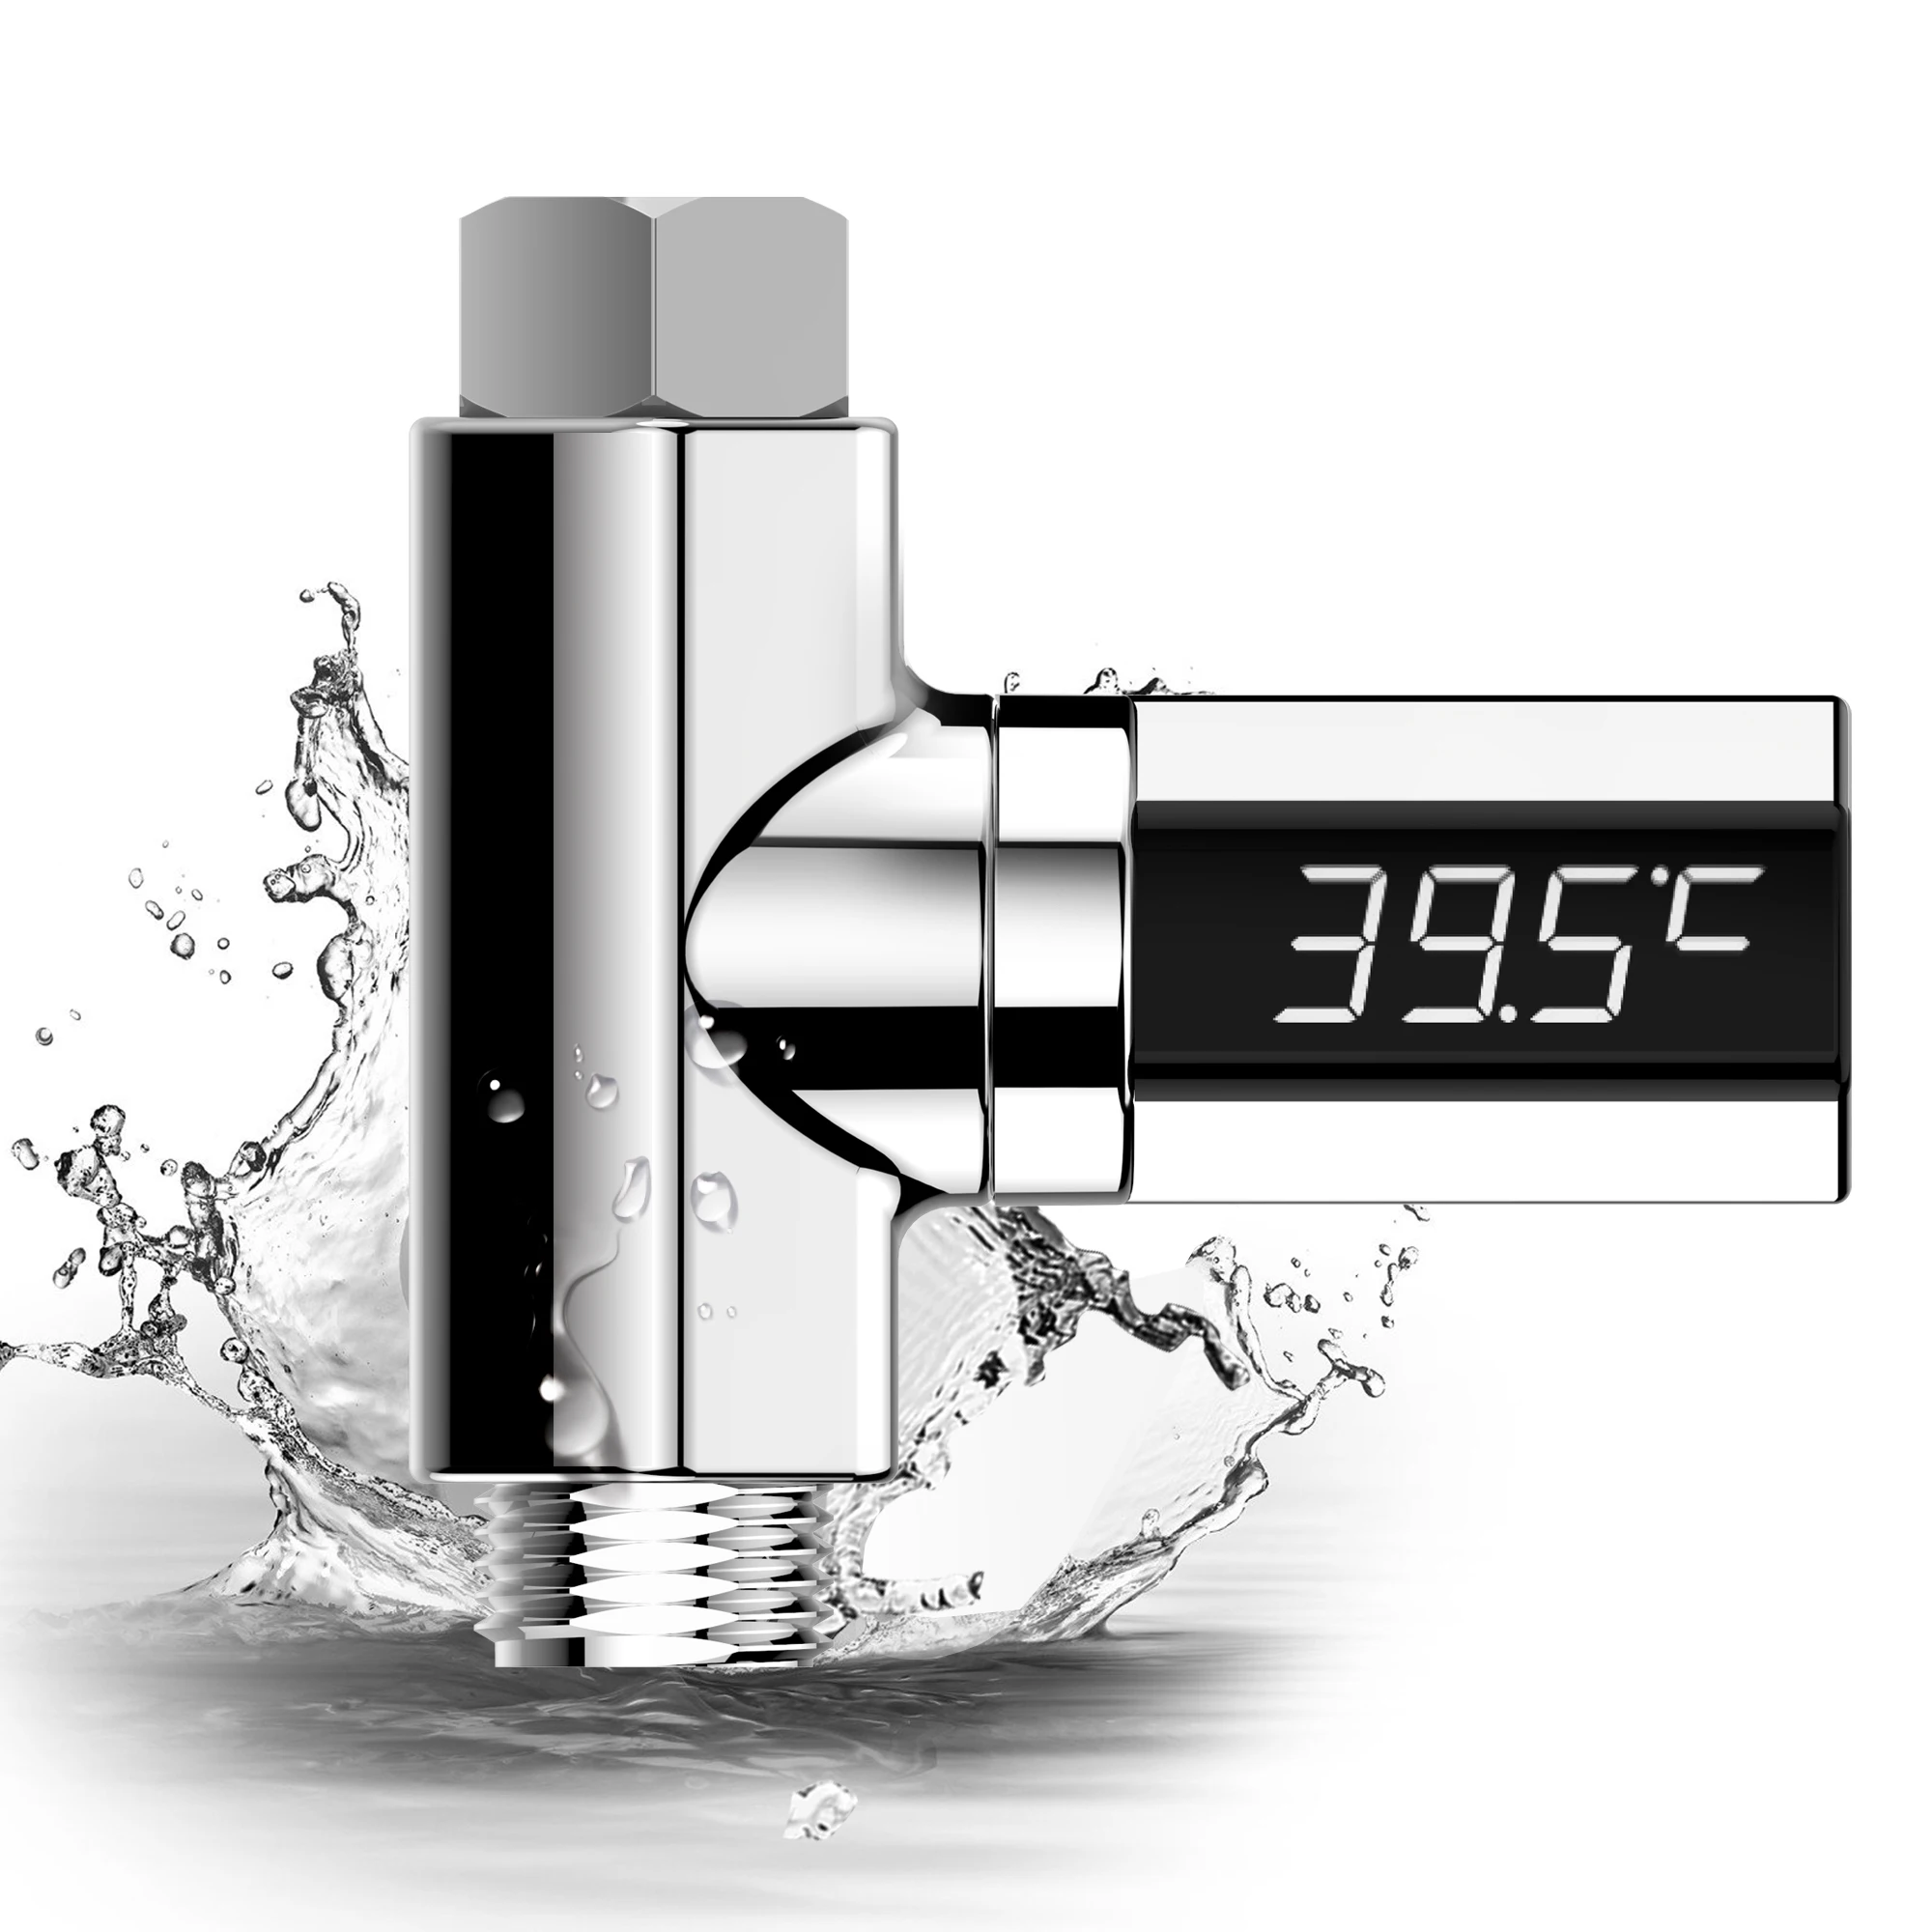 360 Rotating Shower Thermometer Led Digital Display Baby Bath Water  Fahrenheit Celsius Thermometer For Home Bathroom Kitchen Silver